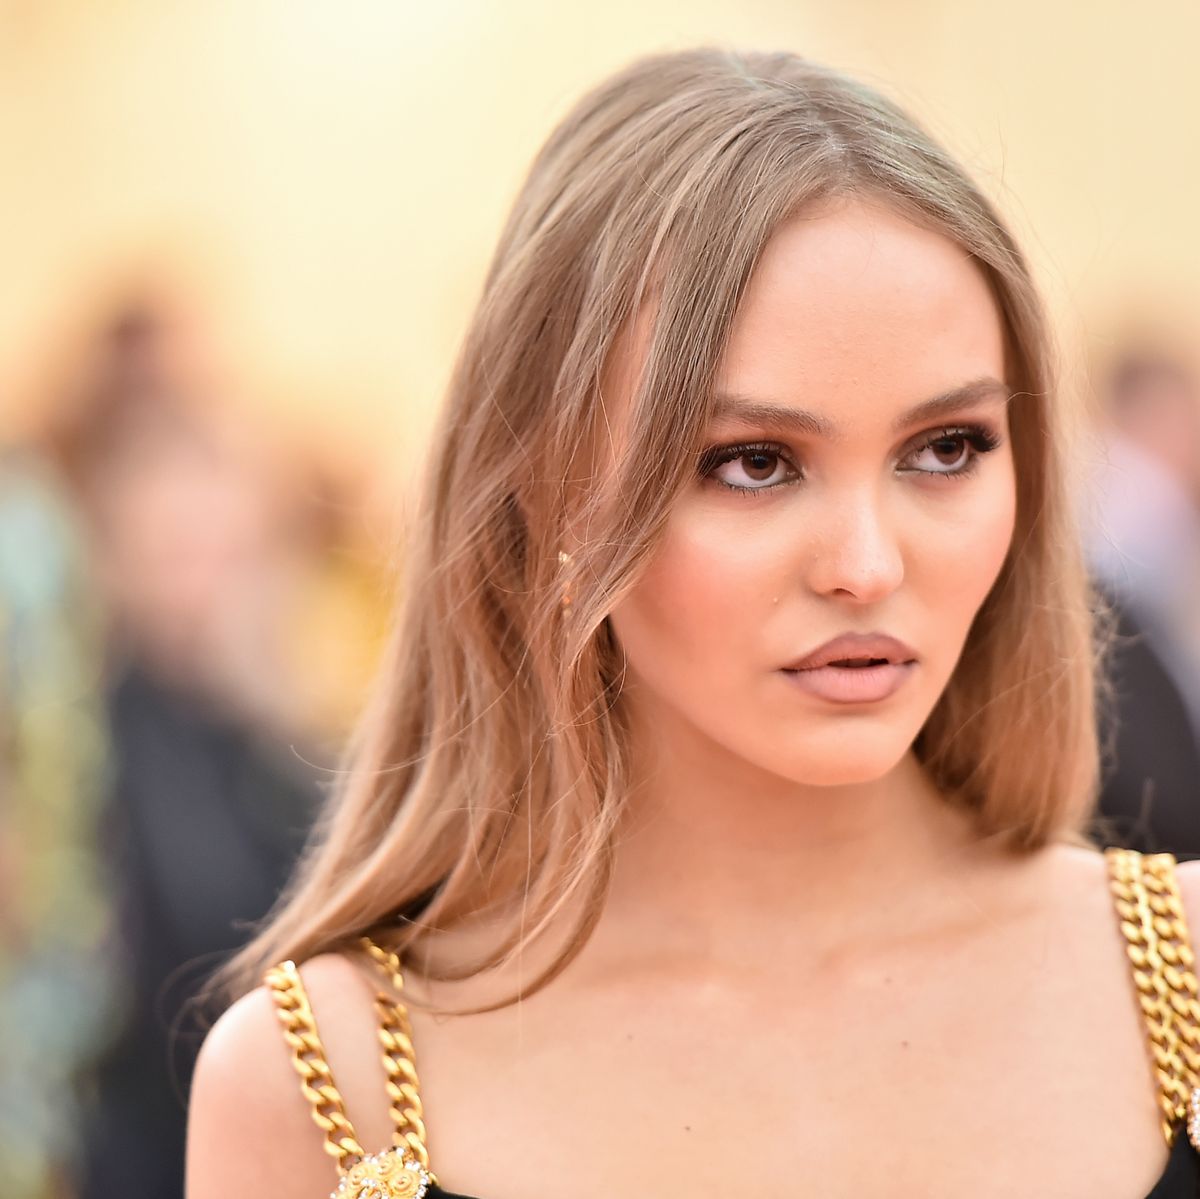 Is Lily-Rose Depp Going to Outdo Her 2019 Met Gala Look in 2022?